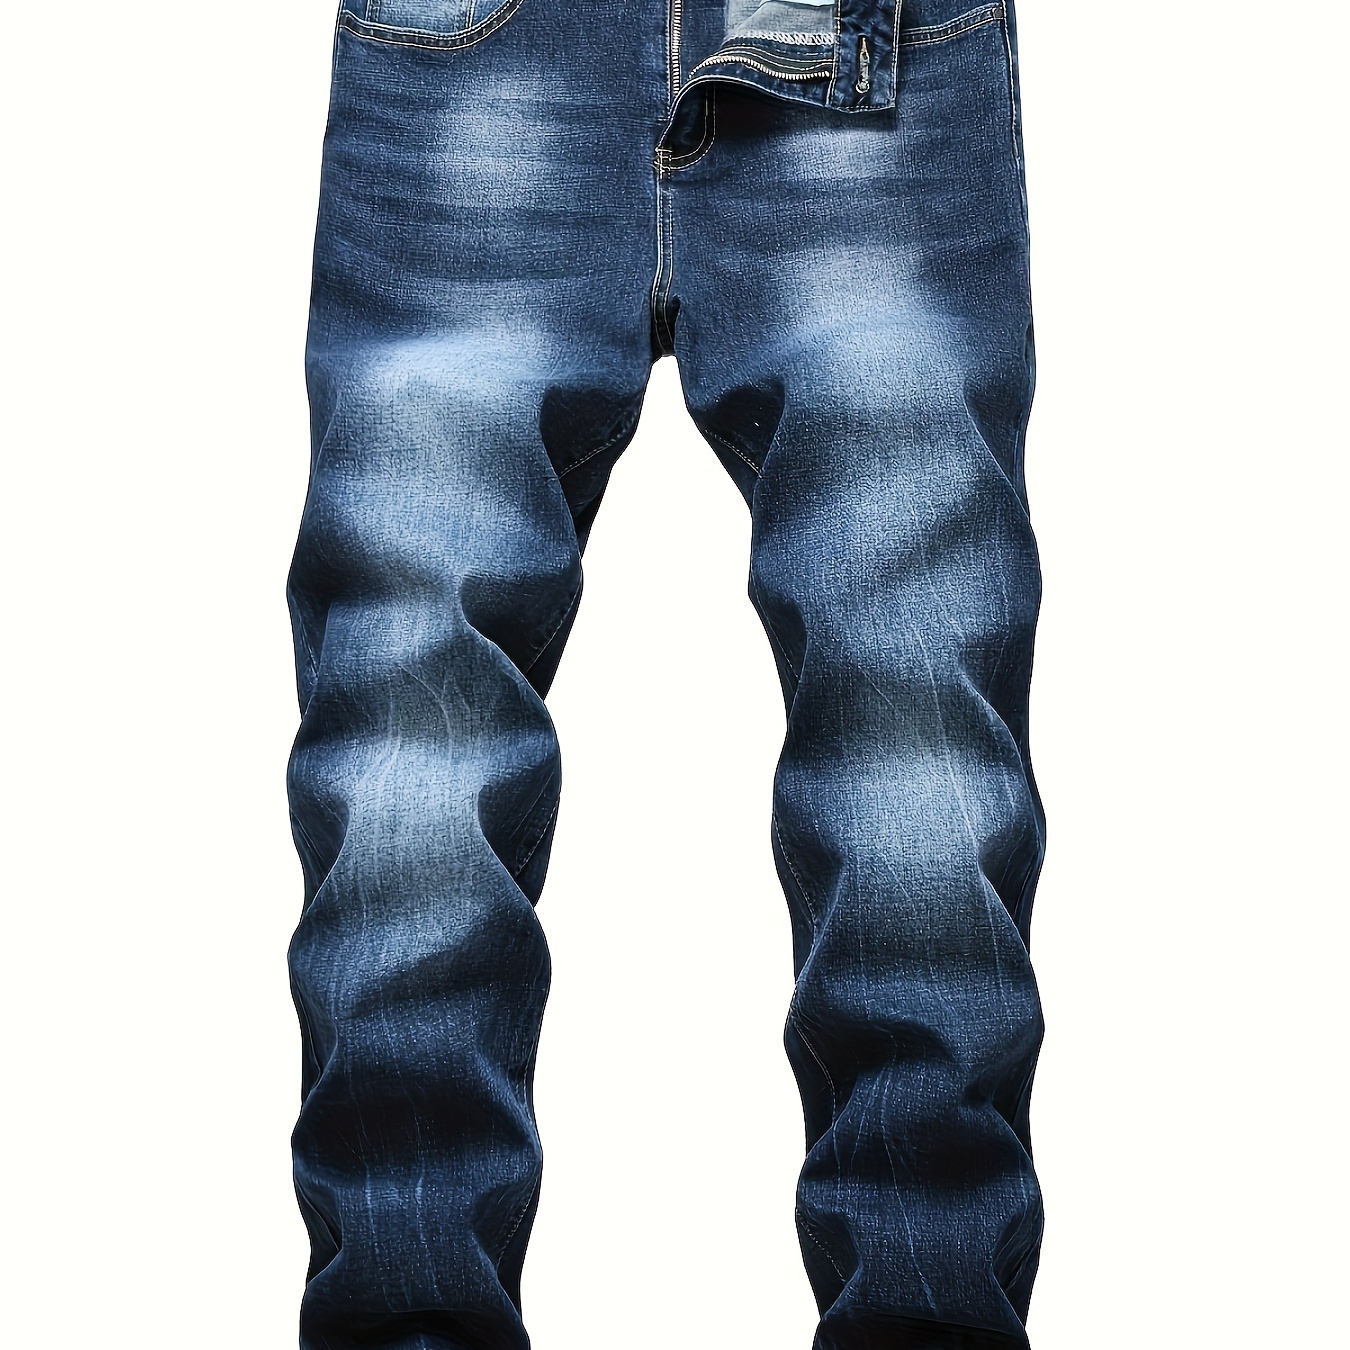 

Men's Chic Jeans, Street Style Distressed Stretch Denim Pants For New Generation